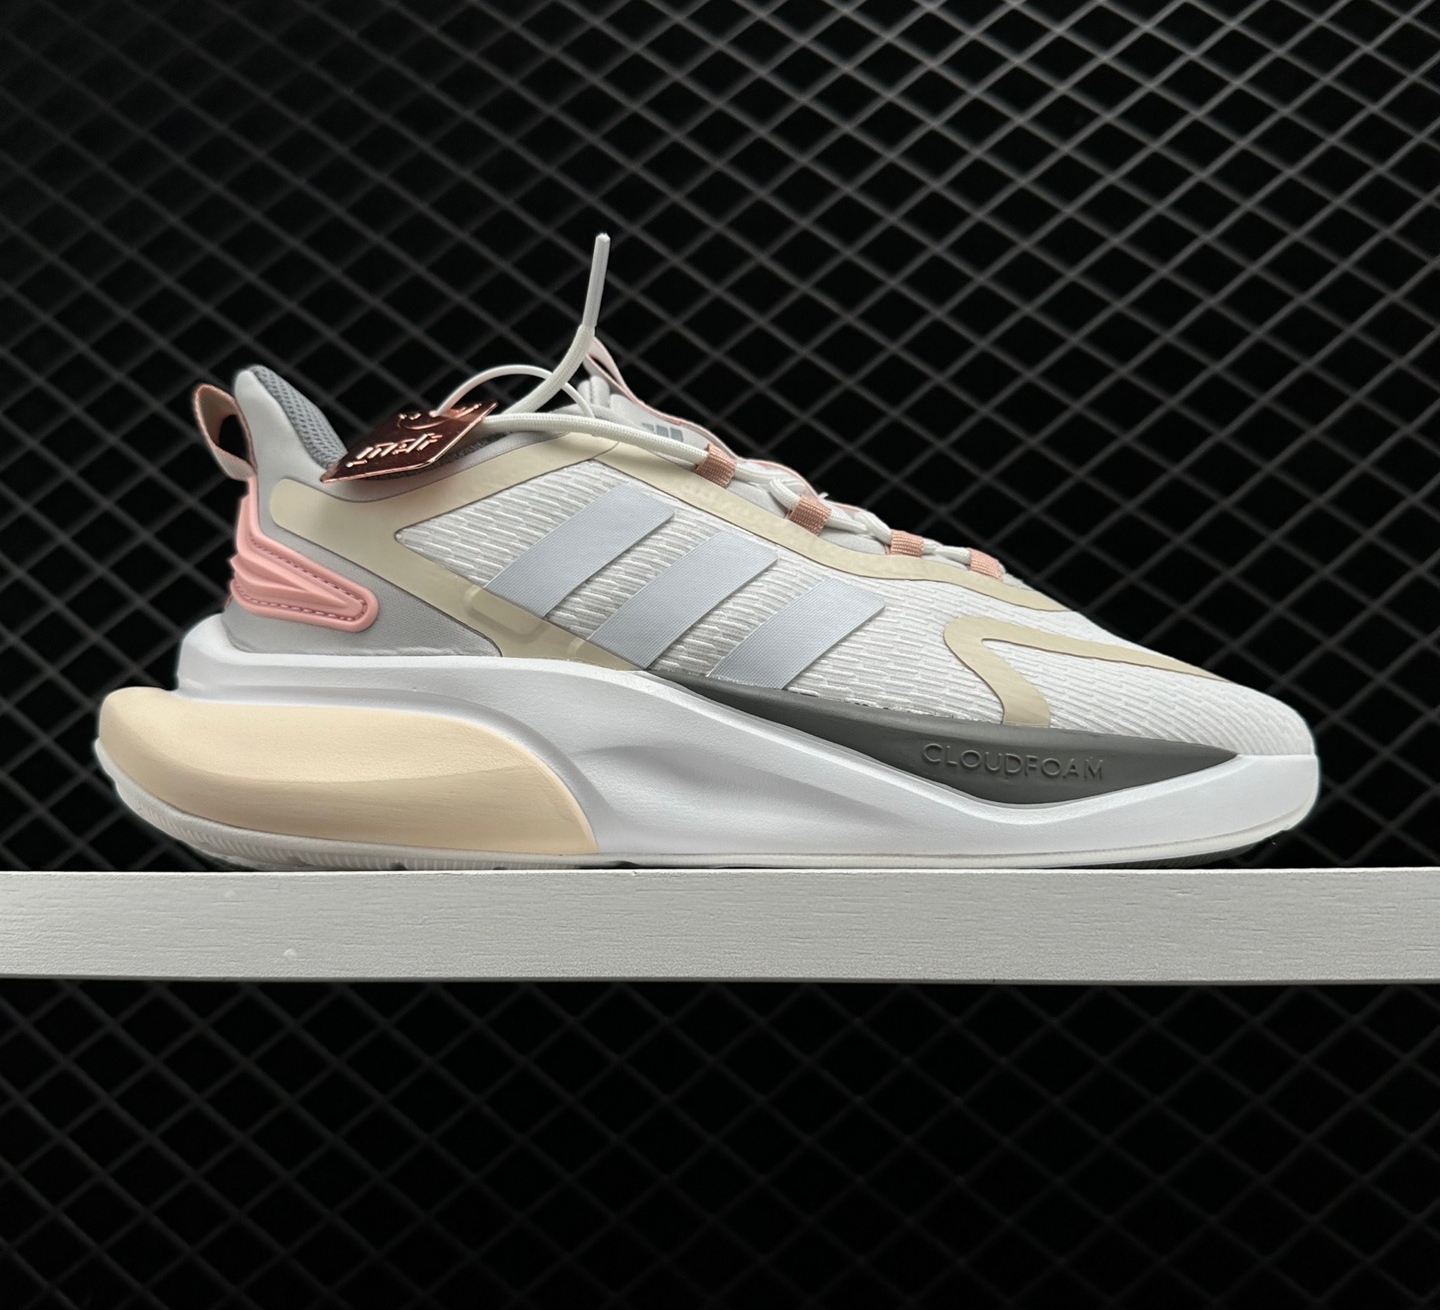 Adidas Alphabounce+ 'White Peach' HP6147 - Stylish and Comfortable Athletic Shoes